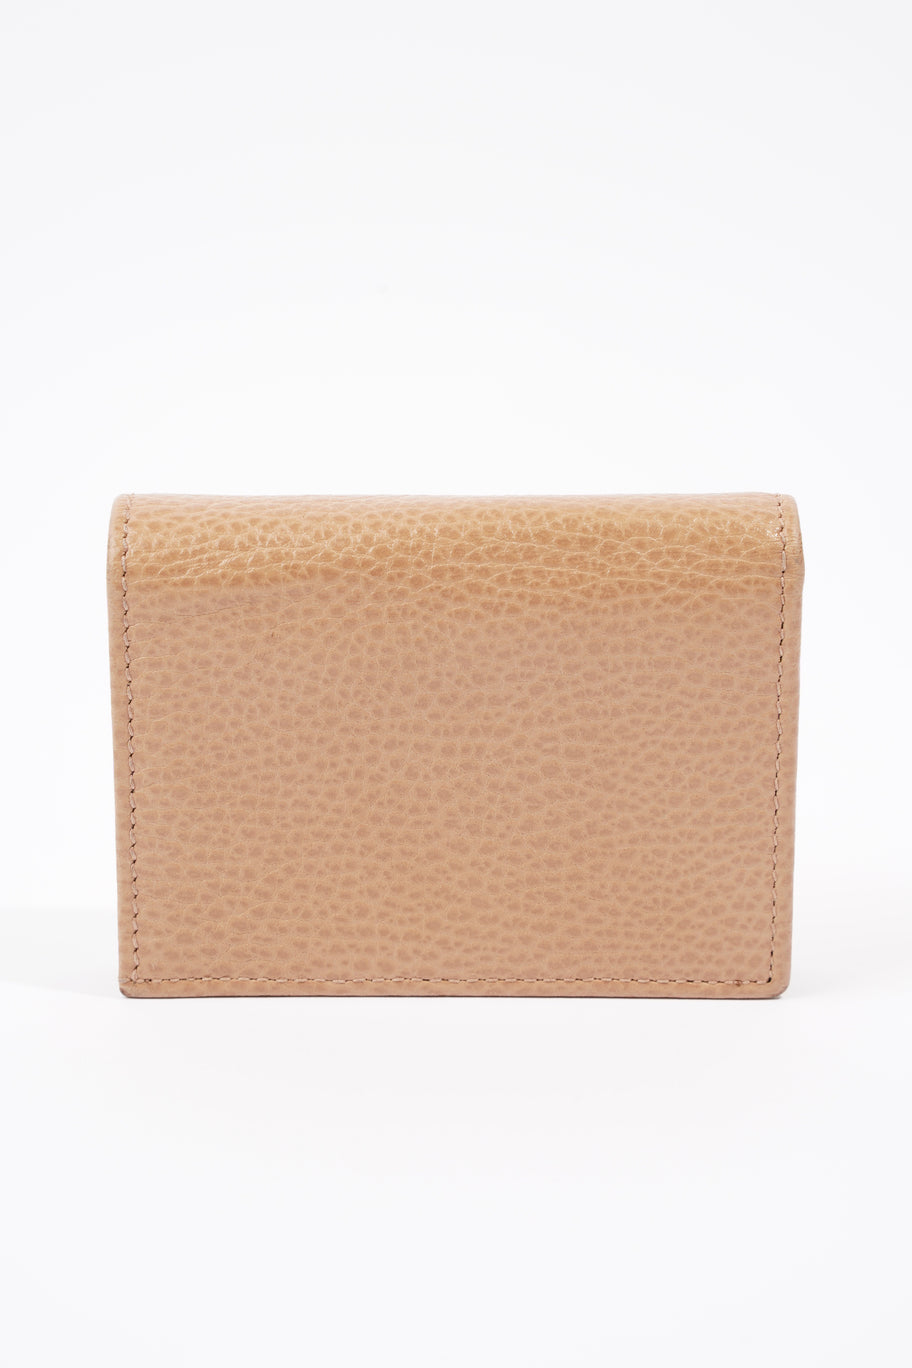 GG Marmont Wallet Pink Leather Image 3